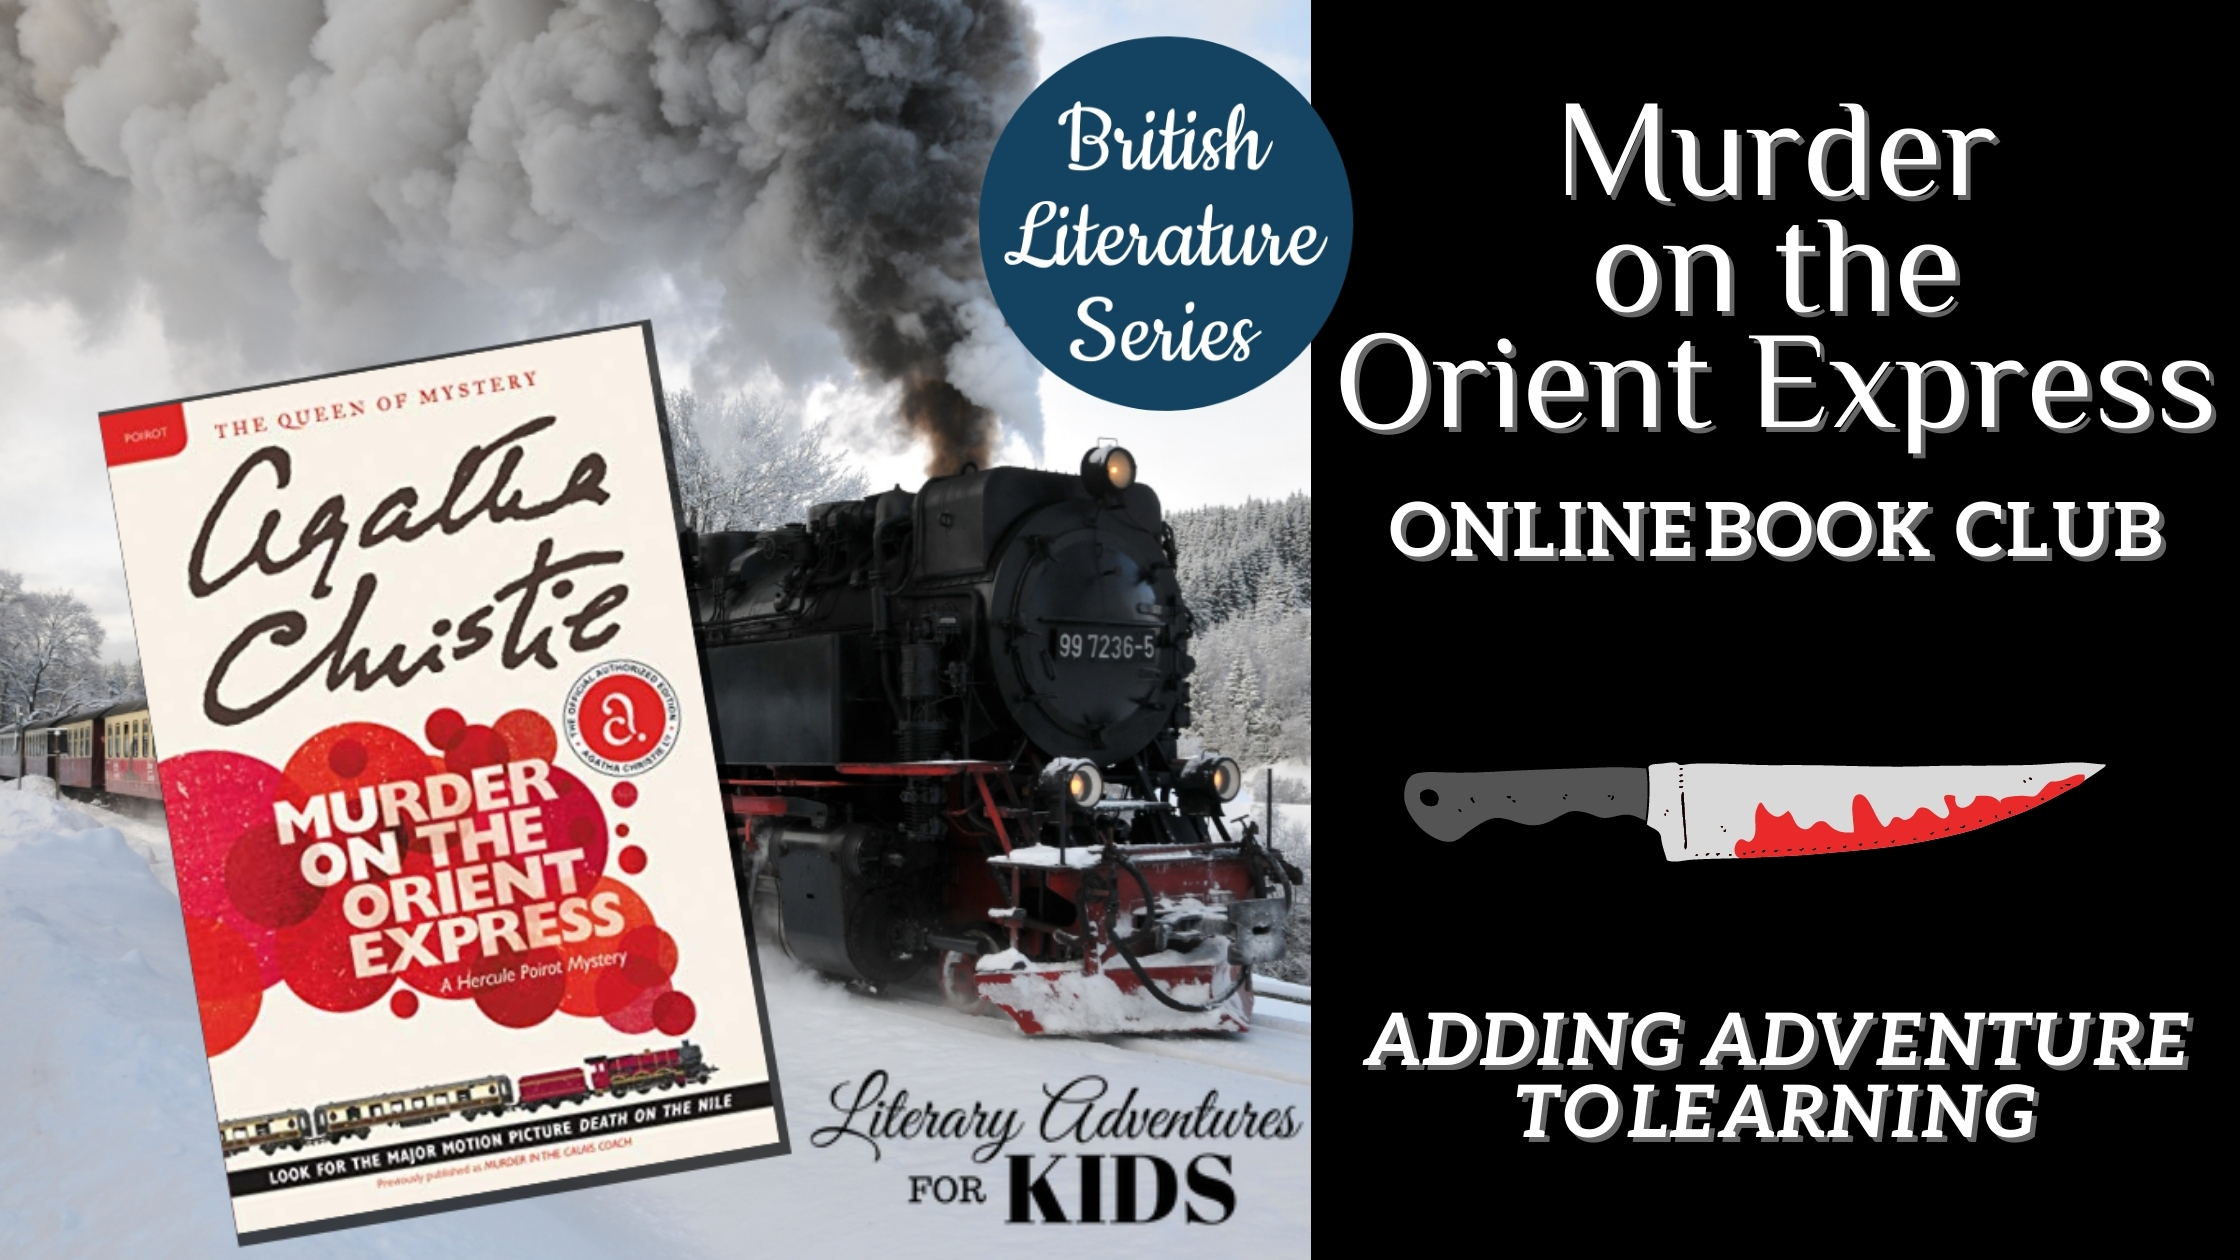 The Orient Express Story